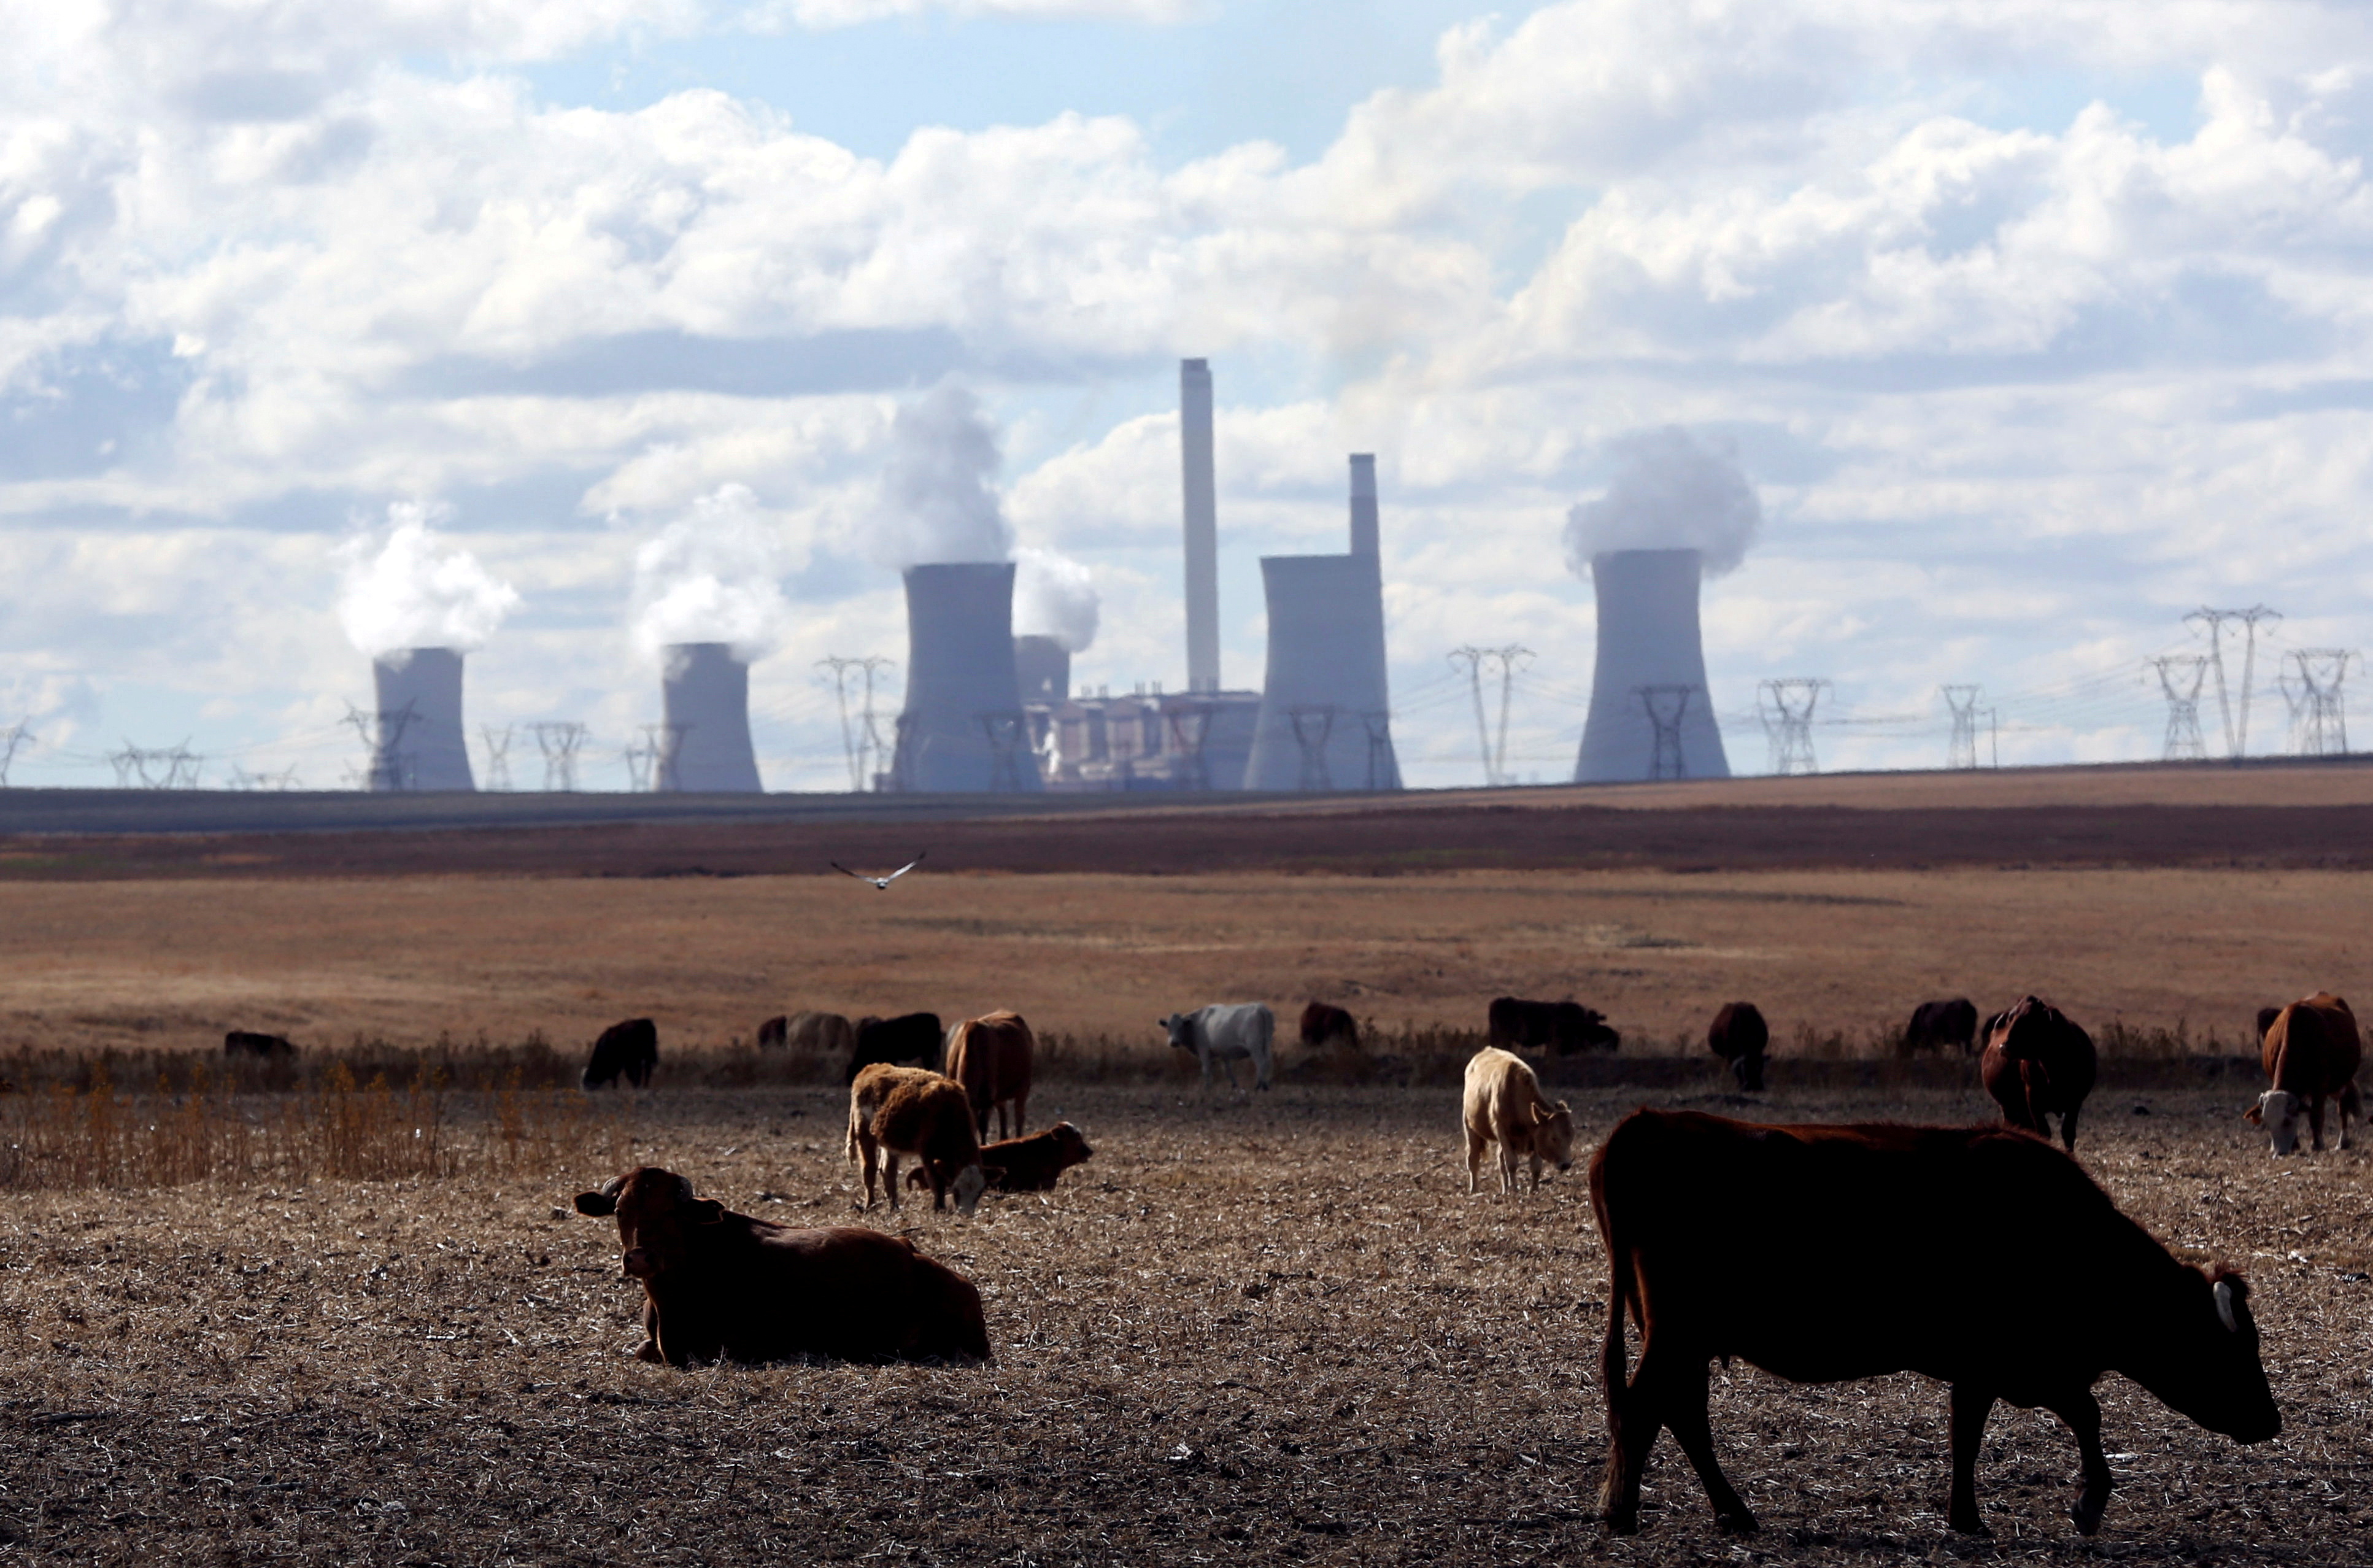 Cows graze as steam rises from the cooling towers of Matla Power Station, a coal-fired power plant operated by Eskom in Mpumalanga province, South Africa